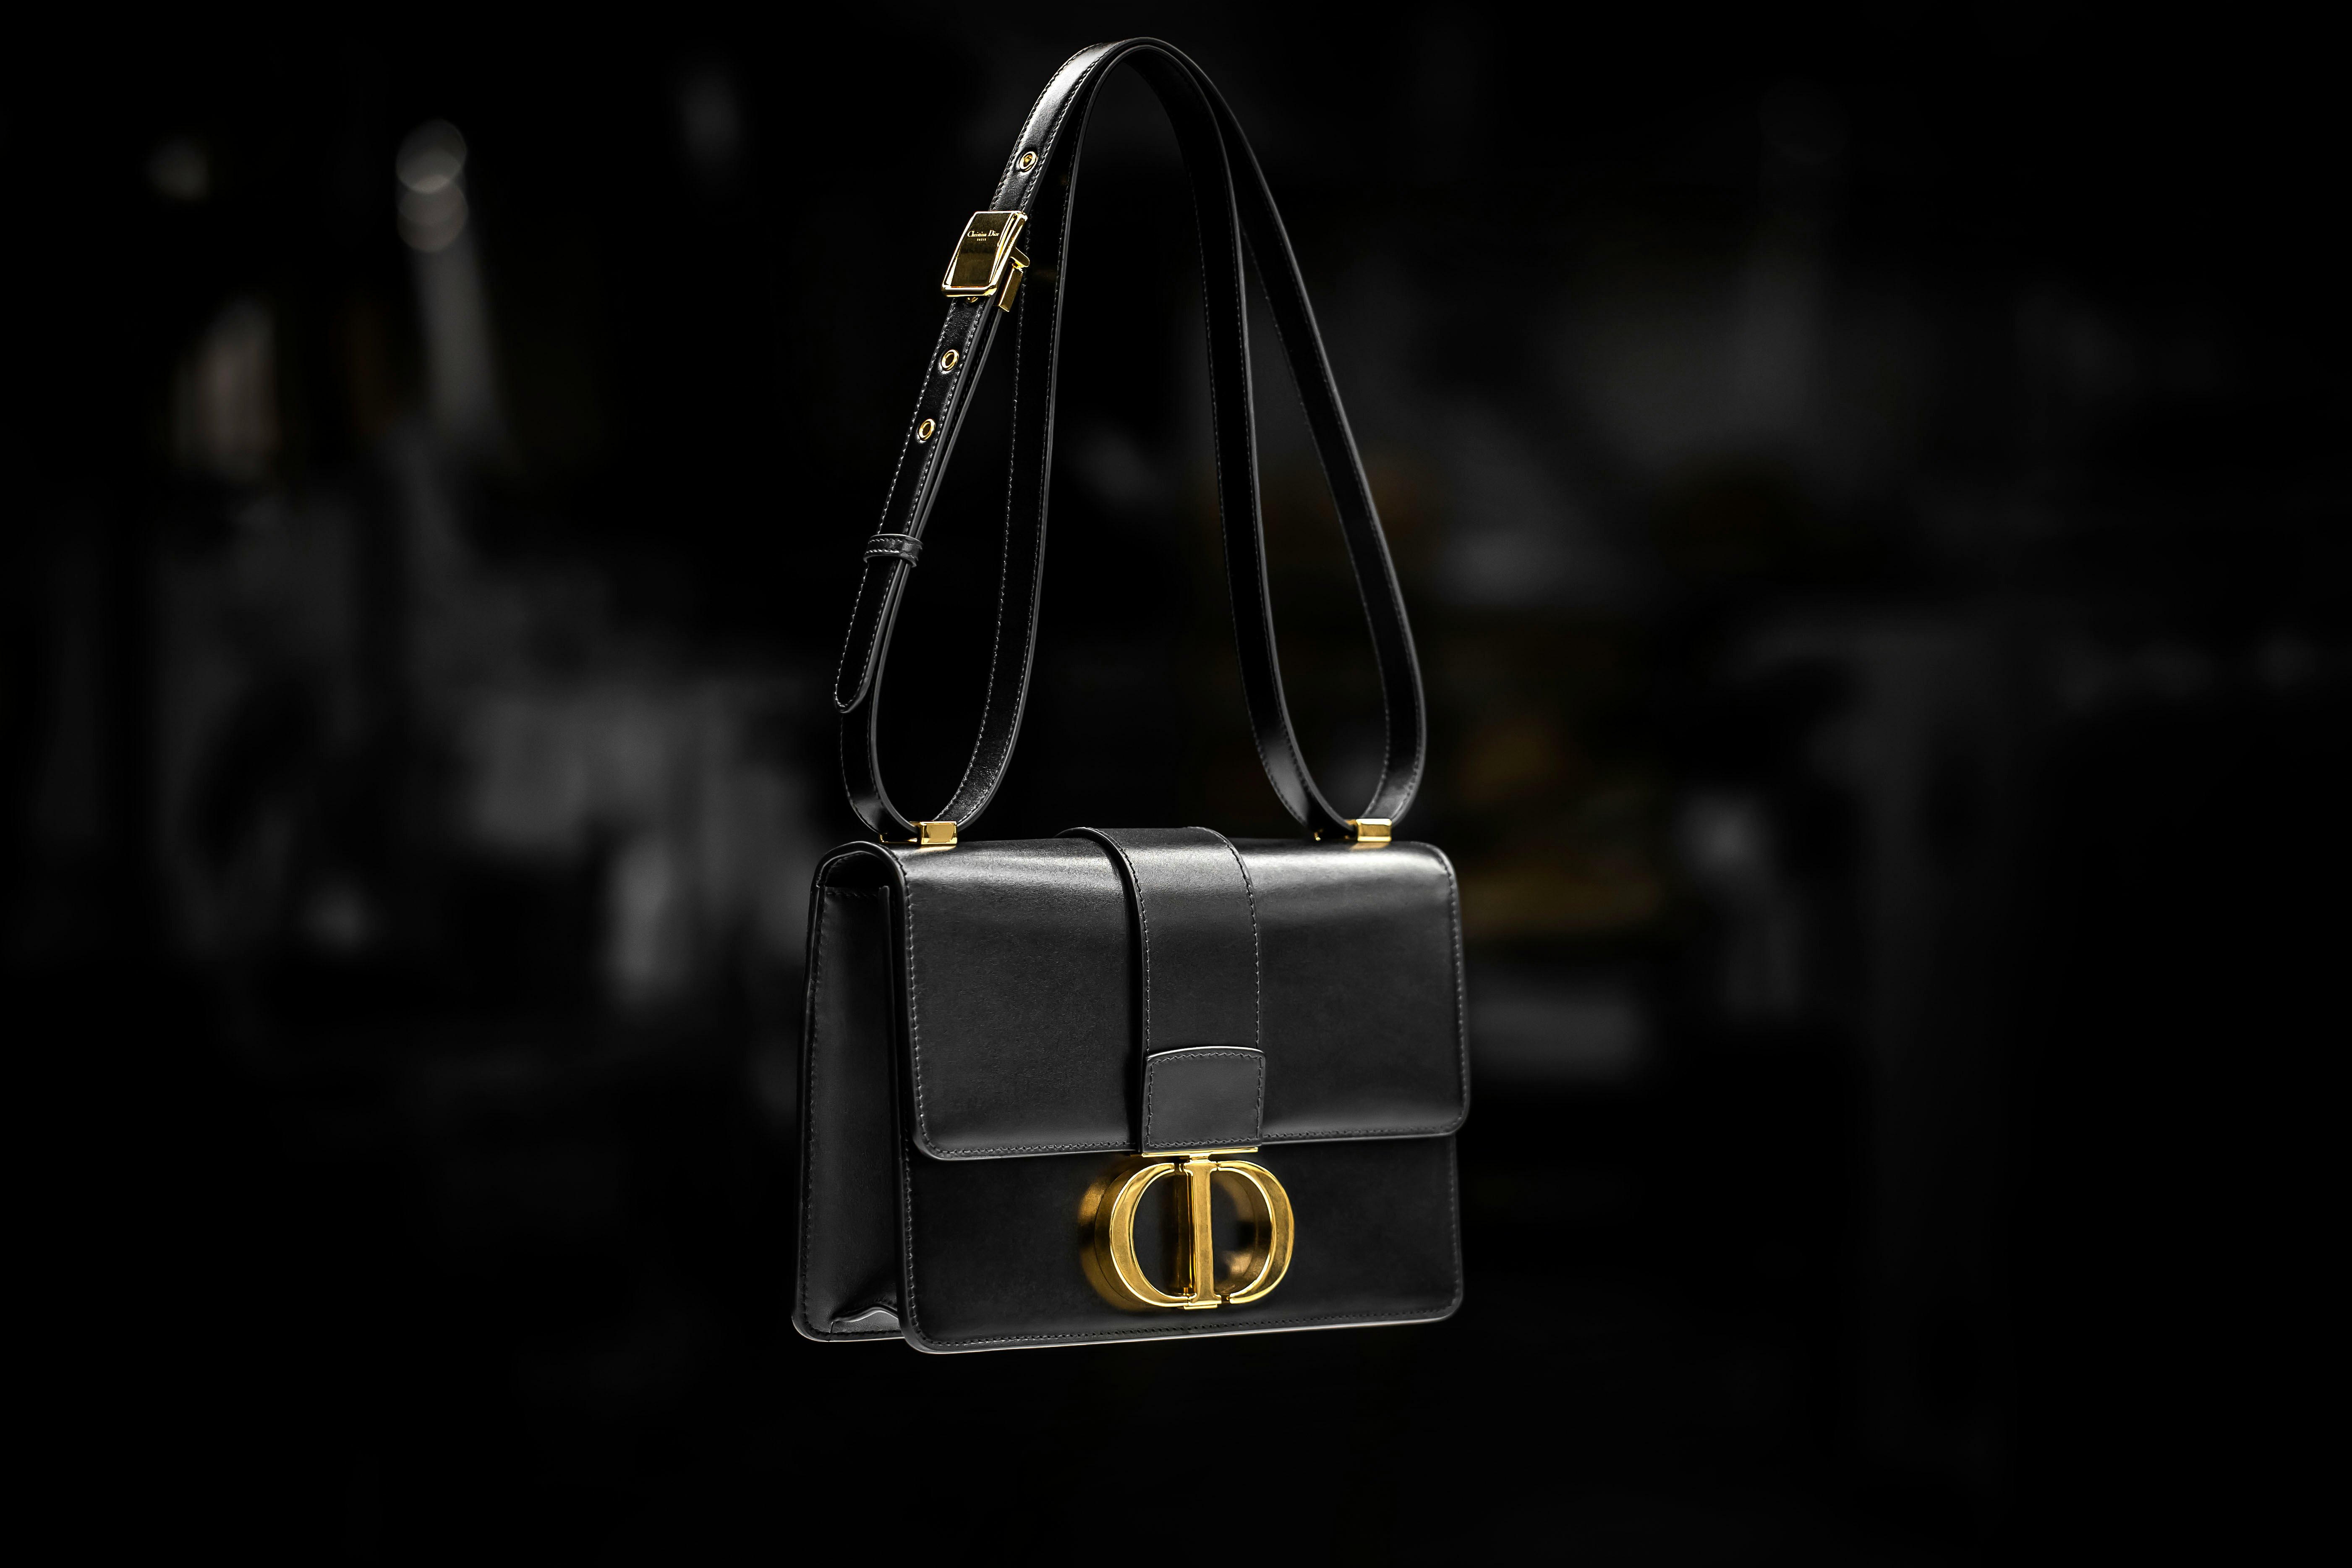 The Dior 30 Montaigne Bag Is An 